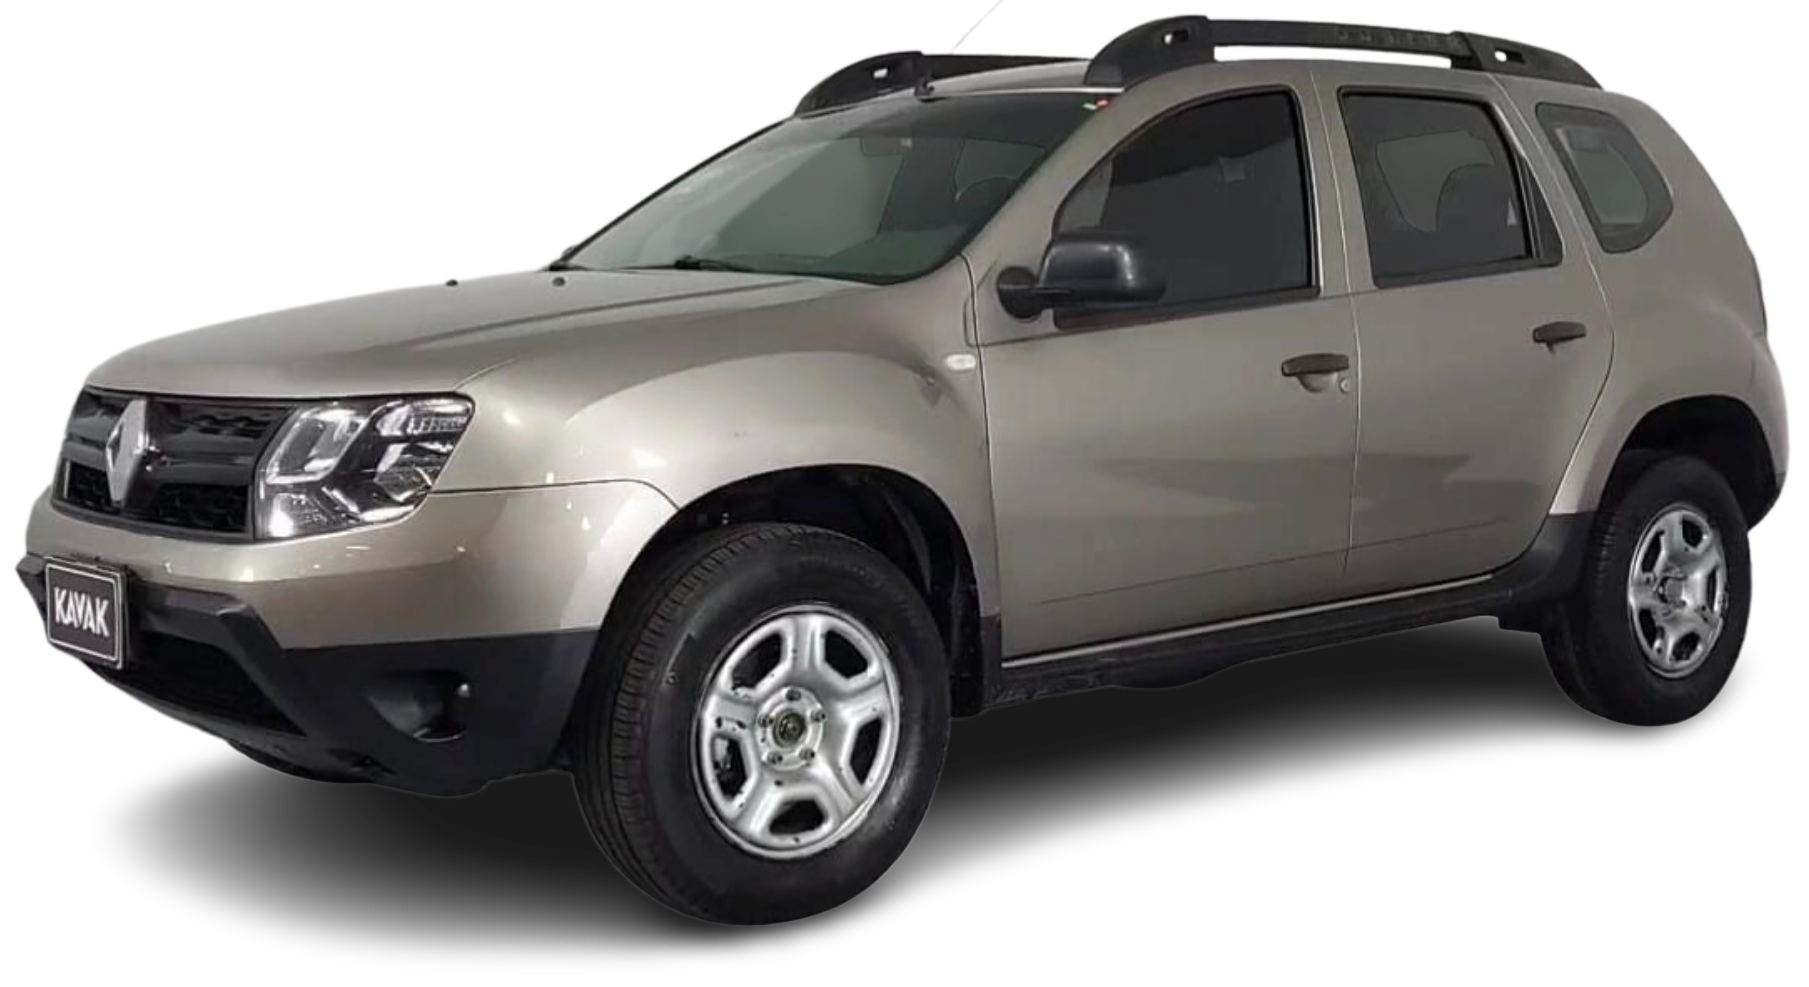 Renault Duster SUV 2020 2019 2018 2017 2016 2015